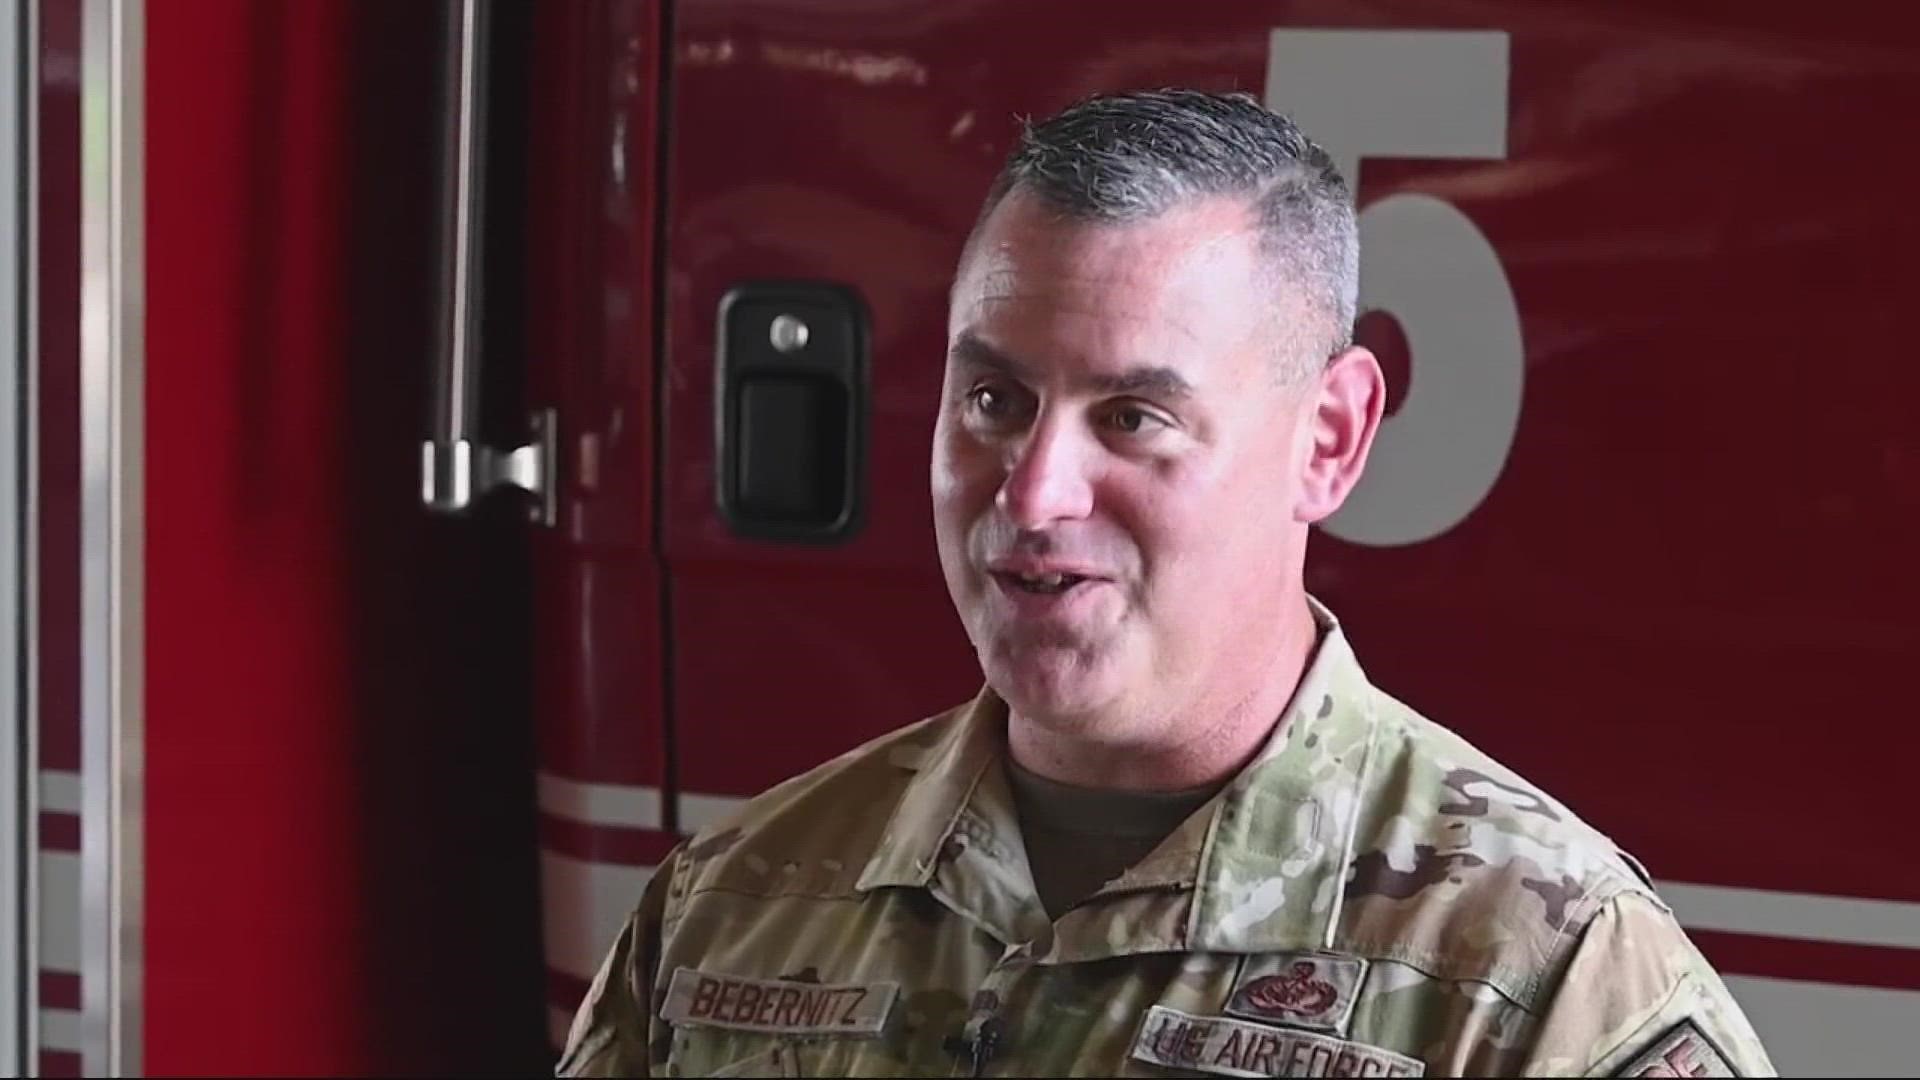 For the last 25 years, Senior Master Sergeant Aaron Bebernitz has been living his dream with the Jacksonville Fire Rescue Department and the United States Air Force.